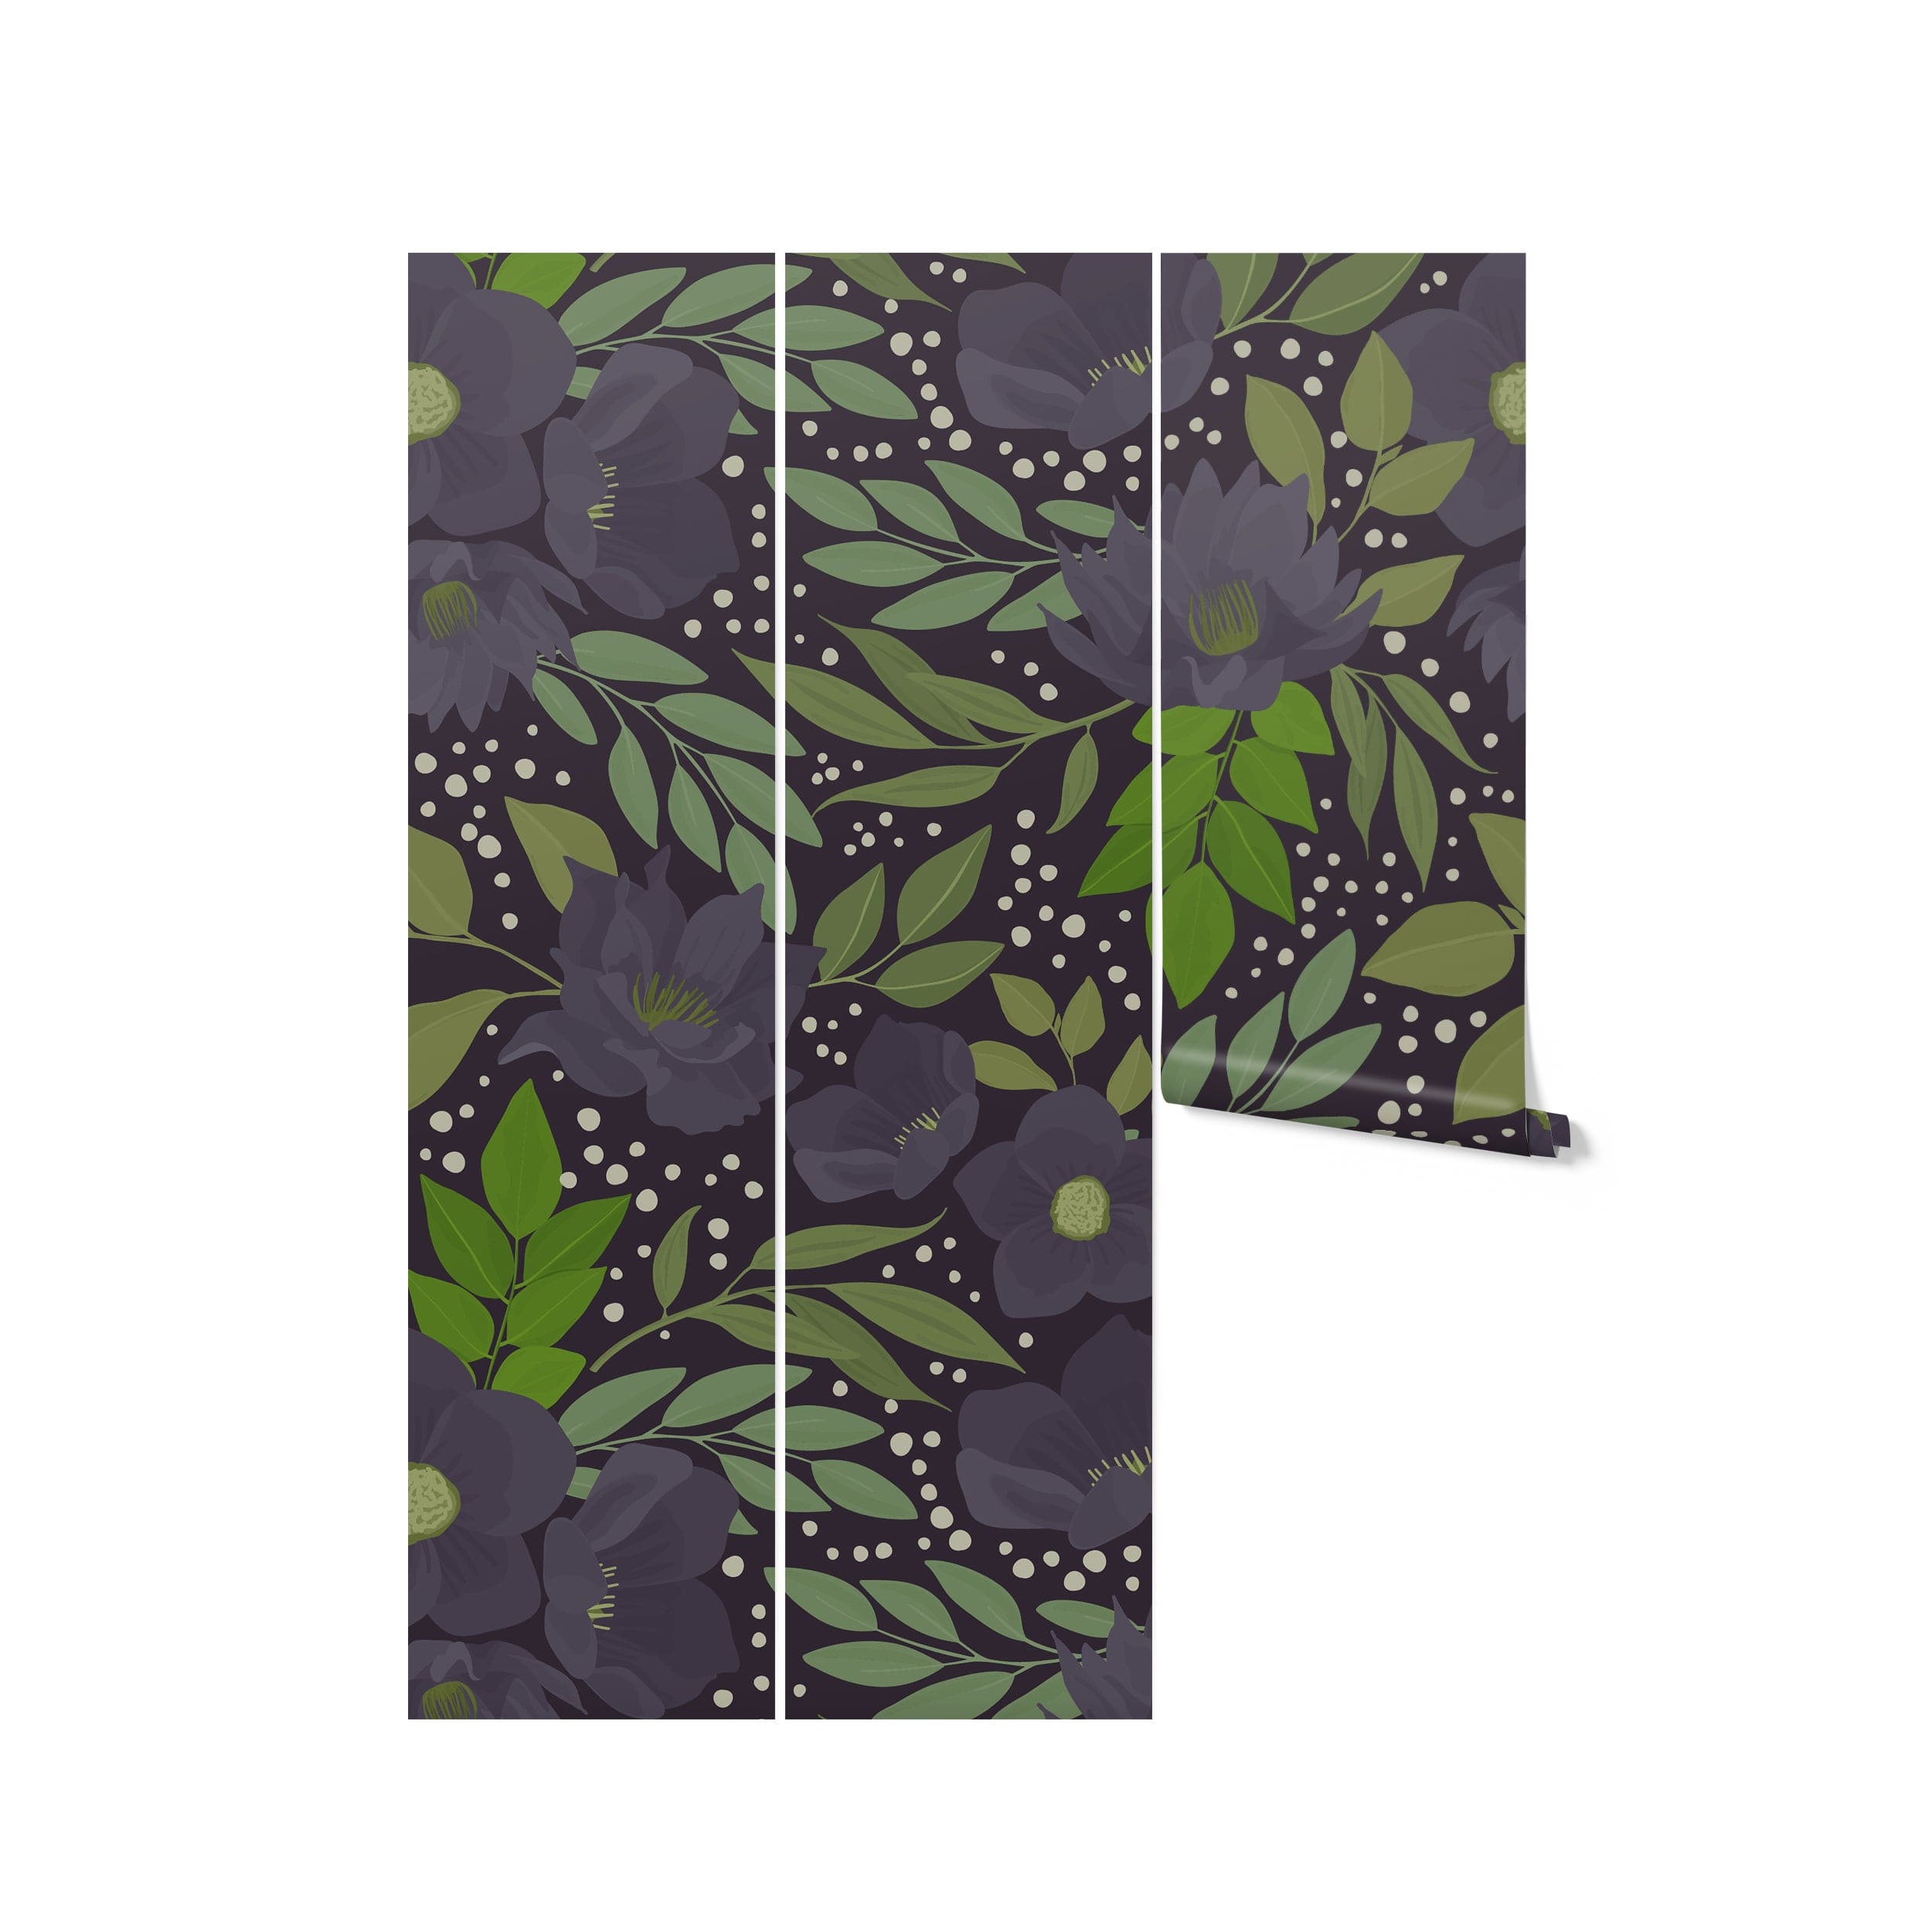 large blue floral wallpaper as a 75" repeating wallpaper option Triptych-style wall art displaying a continuous dark floral pattern with large blooms and green foliage across three panels, the rightmost panel slightly peeled back revealing the wall beneath